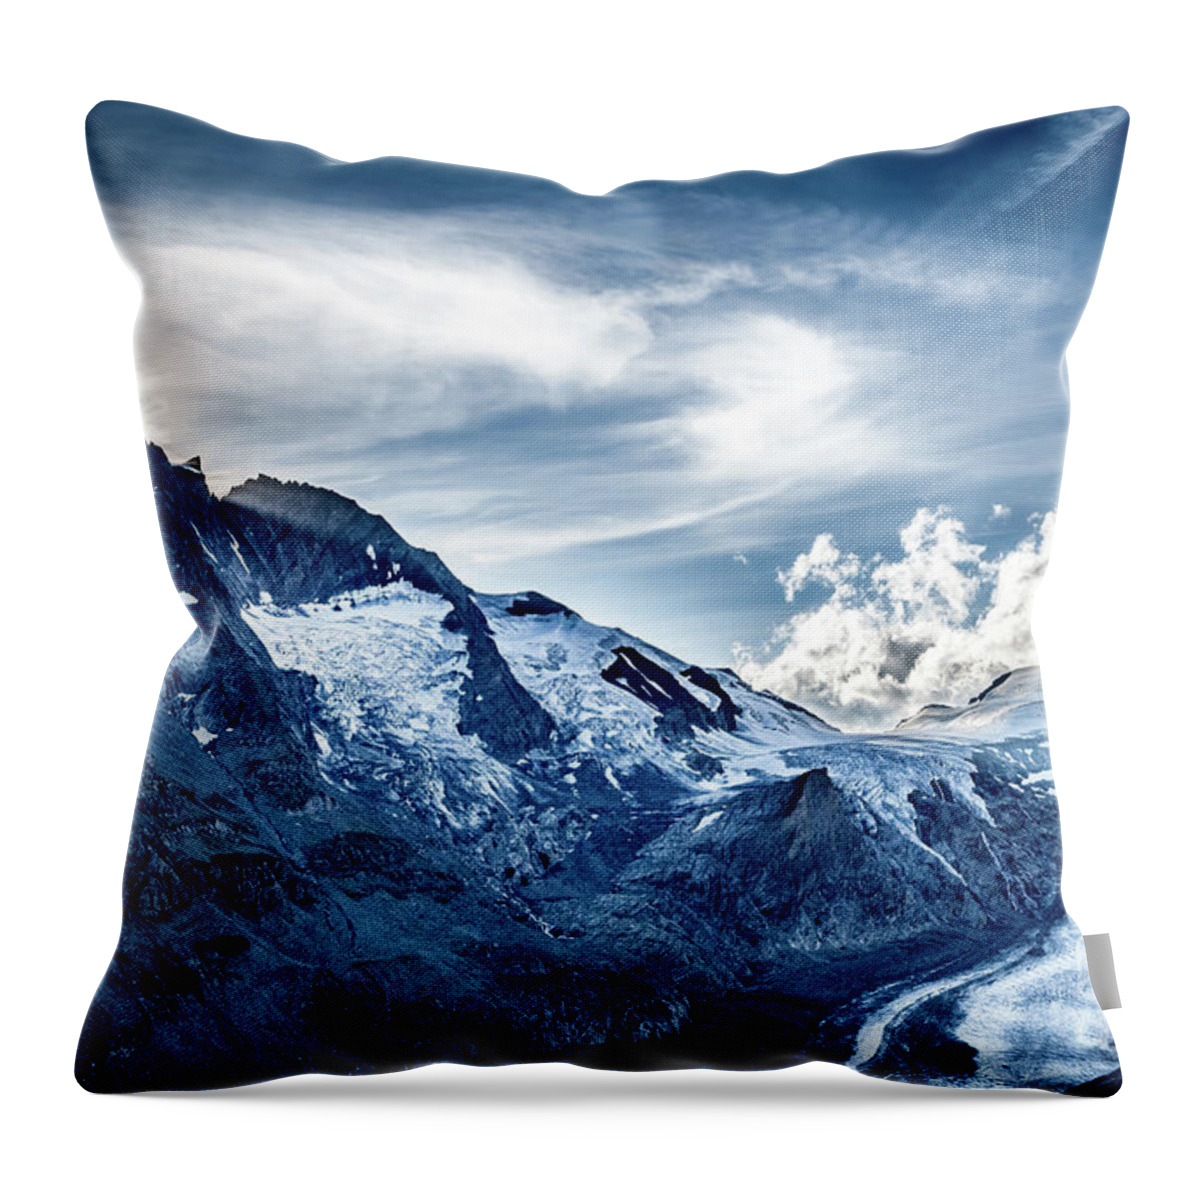 Adventure Throw Pillow featuring the photograph National Park Hohe Tauern With Grossglockner The Highest Mountain Peak Of Austria And The Alps by Andreas Berthold